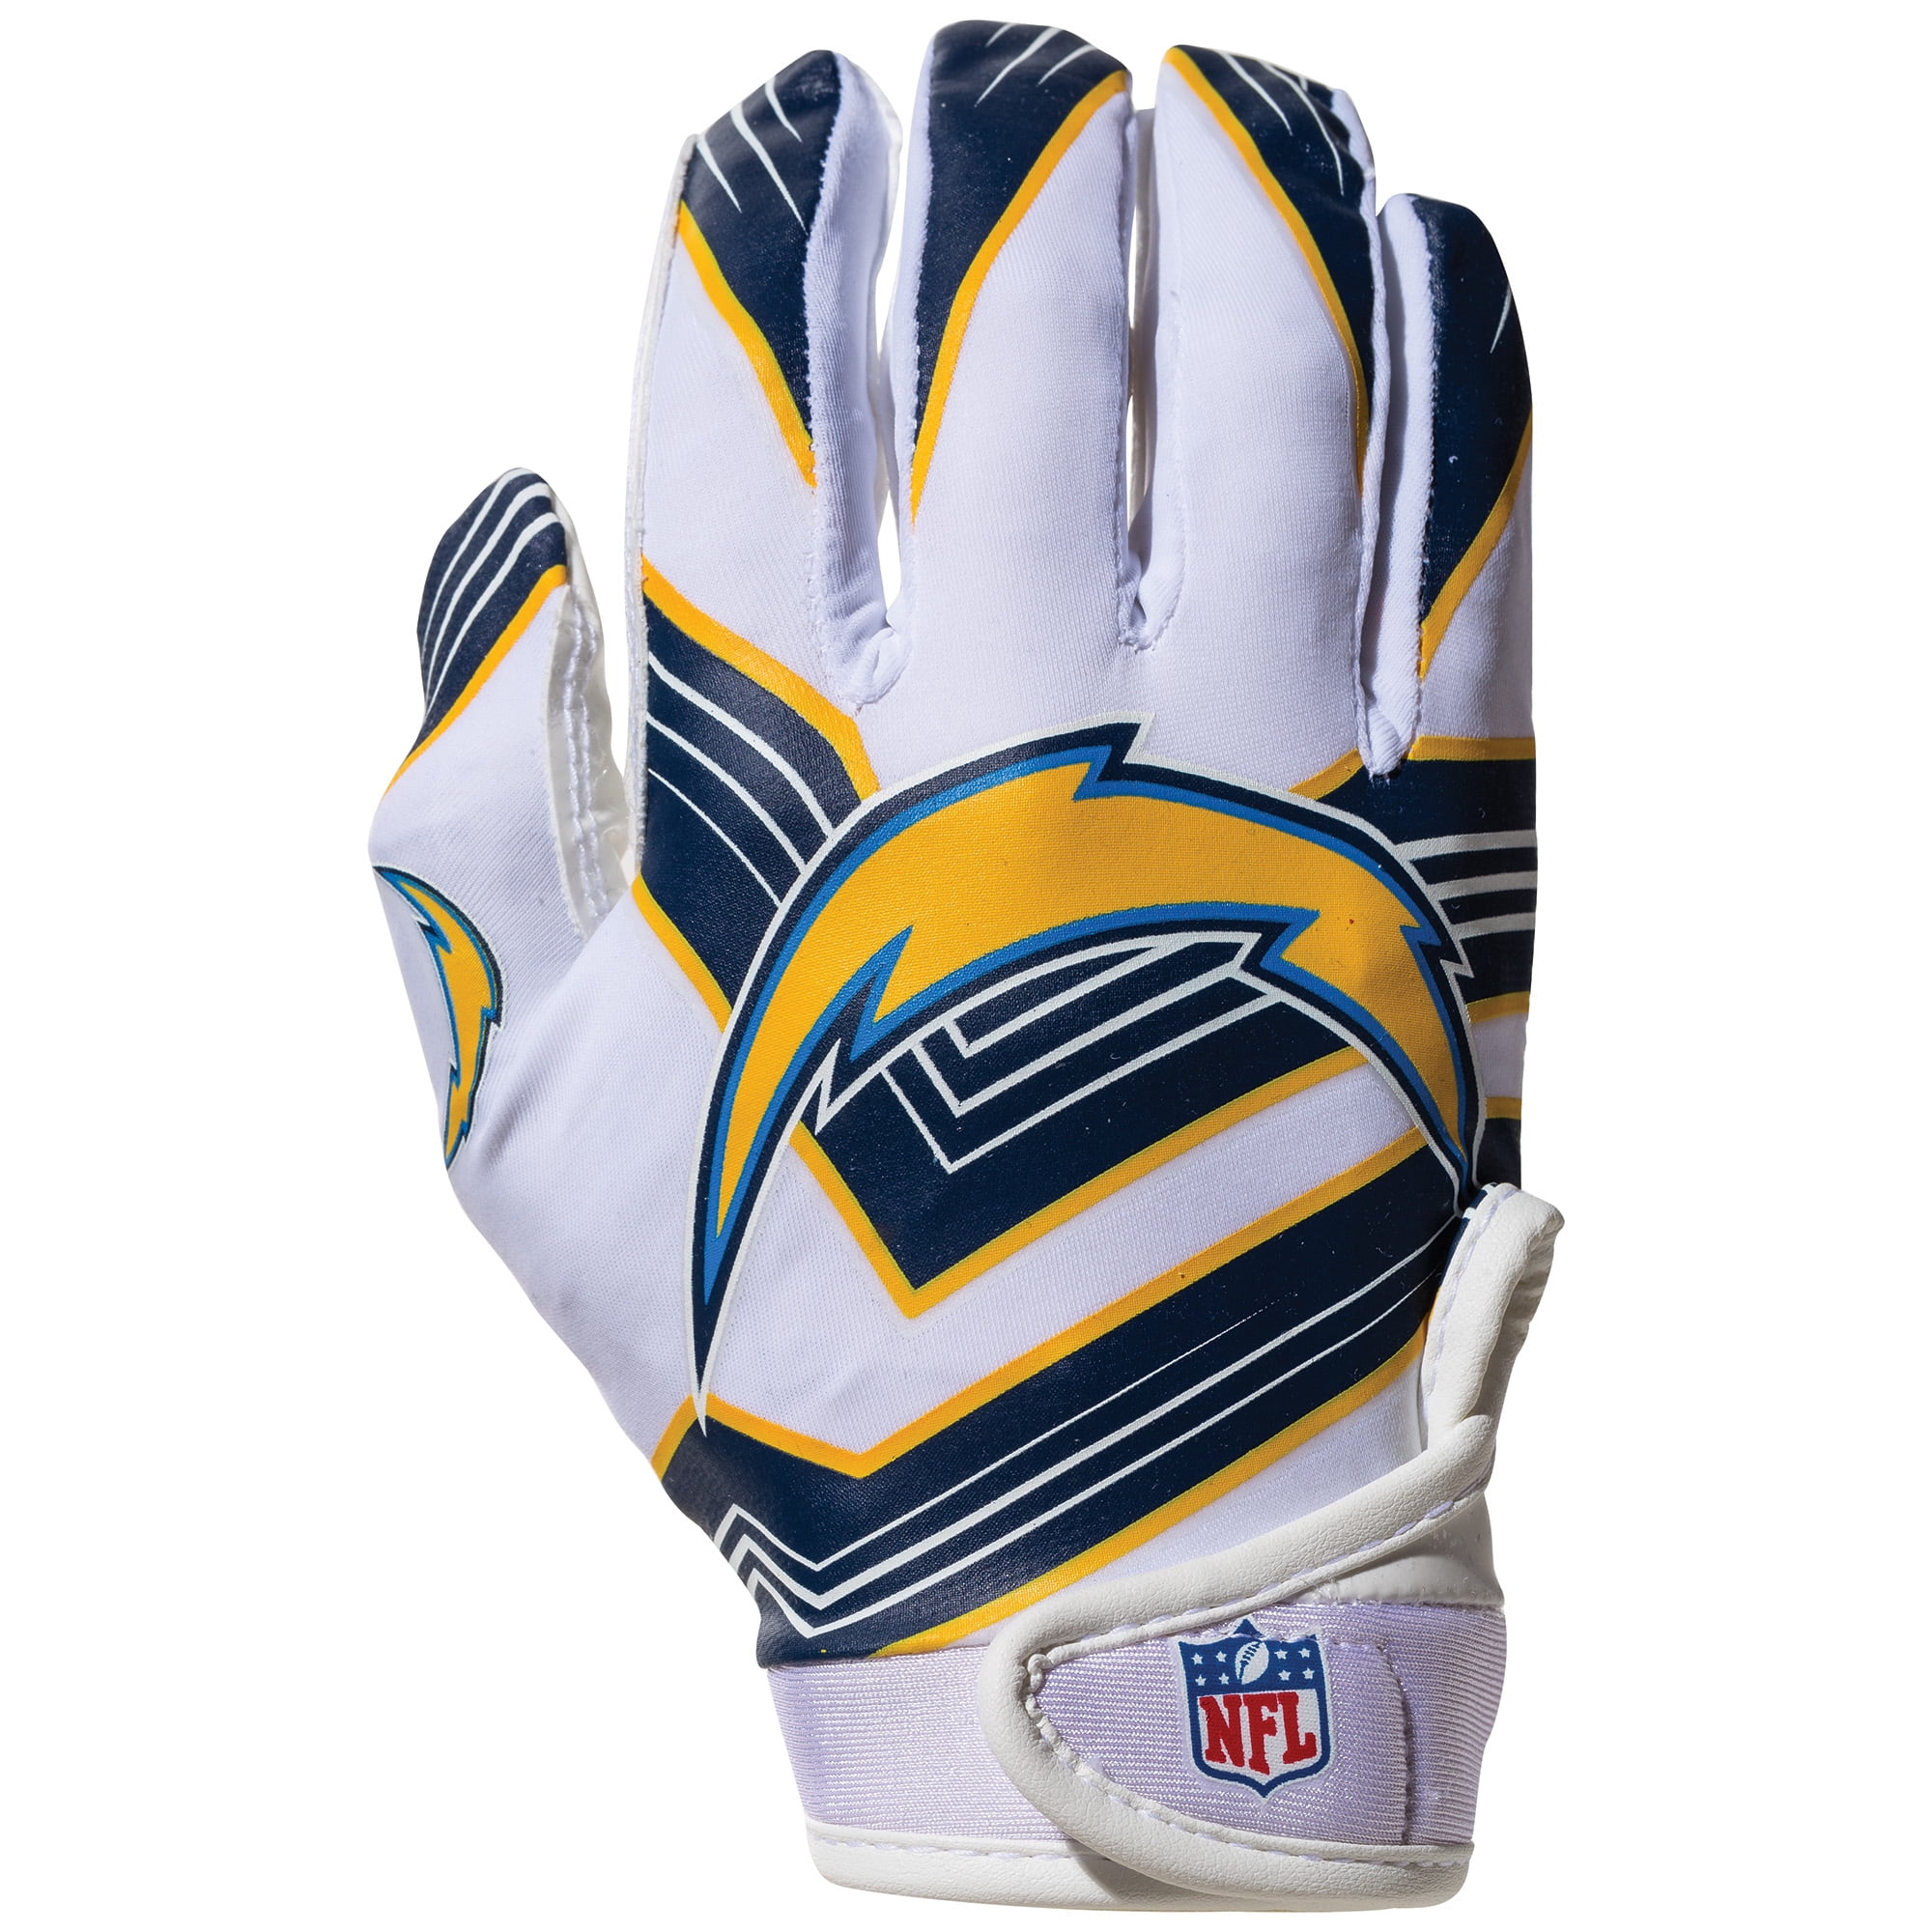 miami dolphins wide receiver gloves